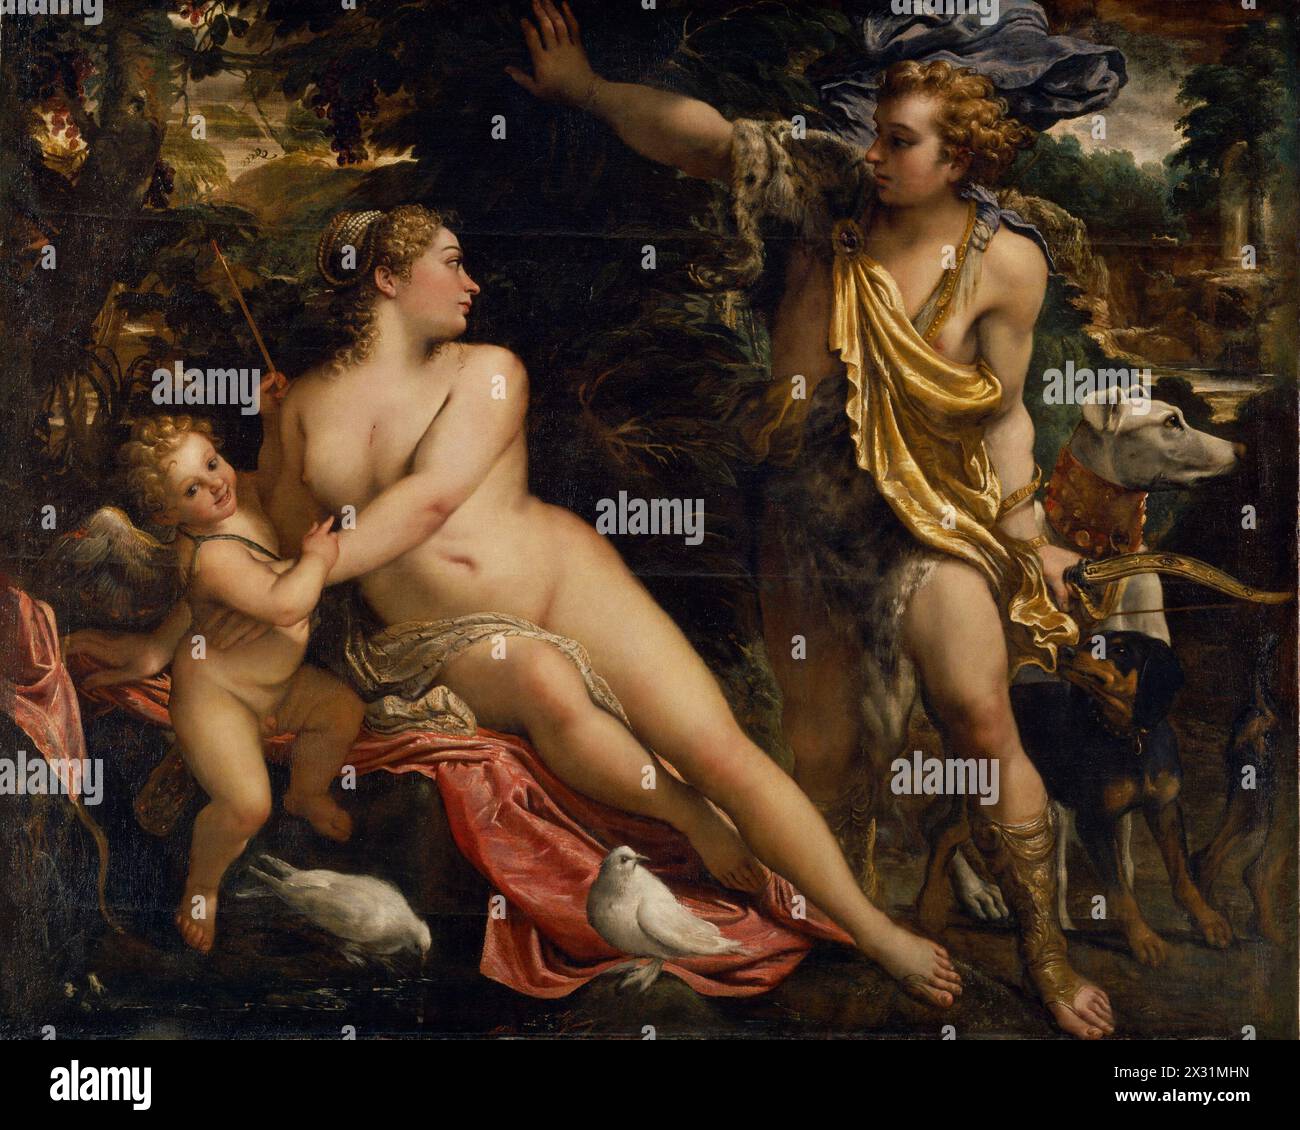 Venus, Adonis and Cupid by Annibale Carracci Stock Photo